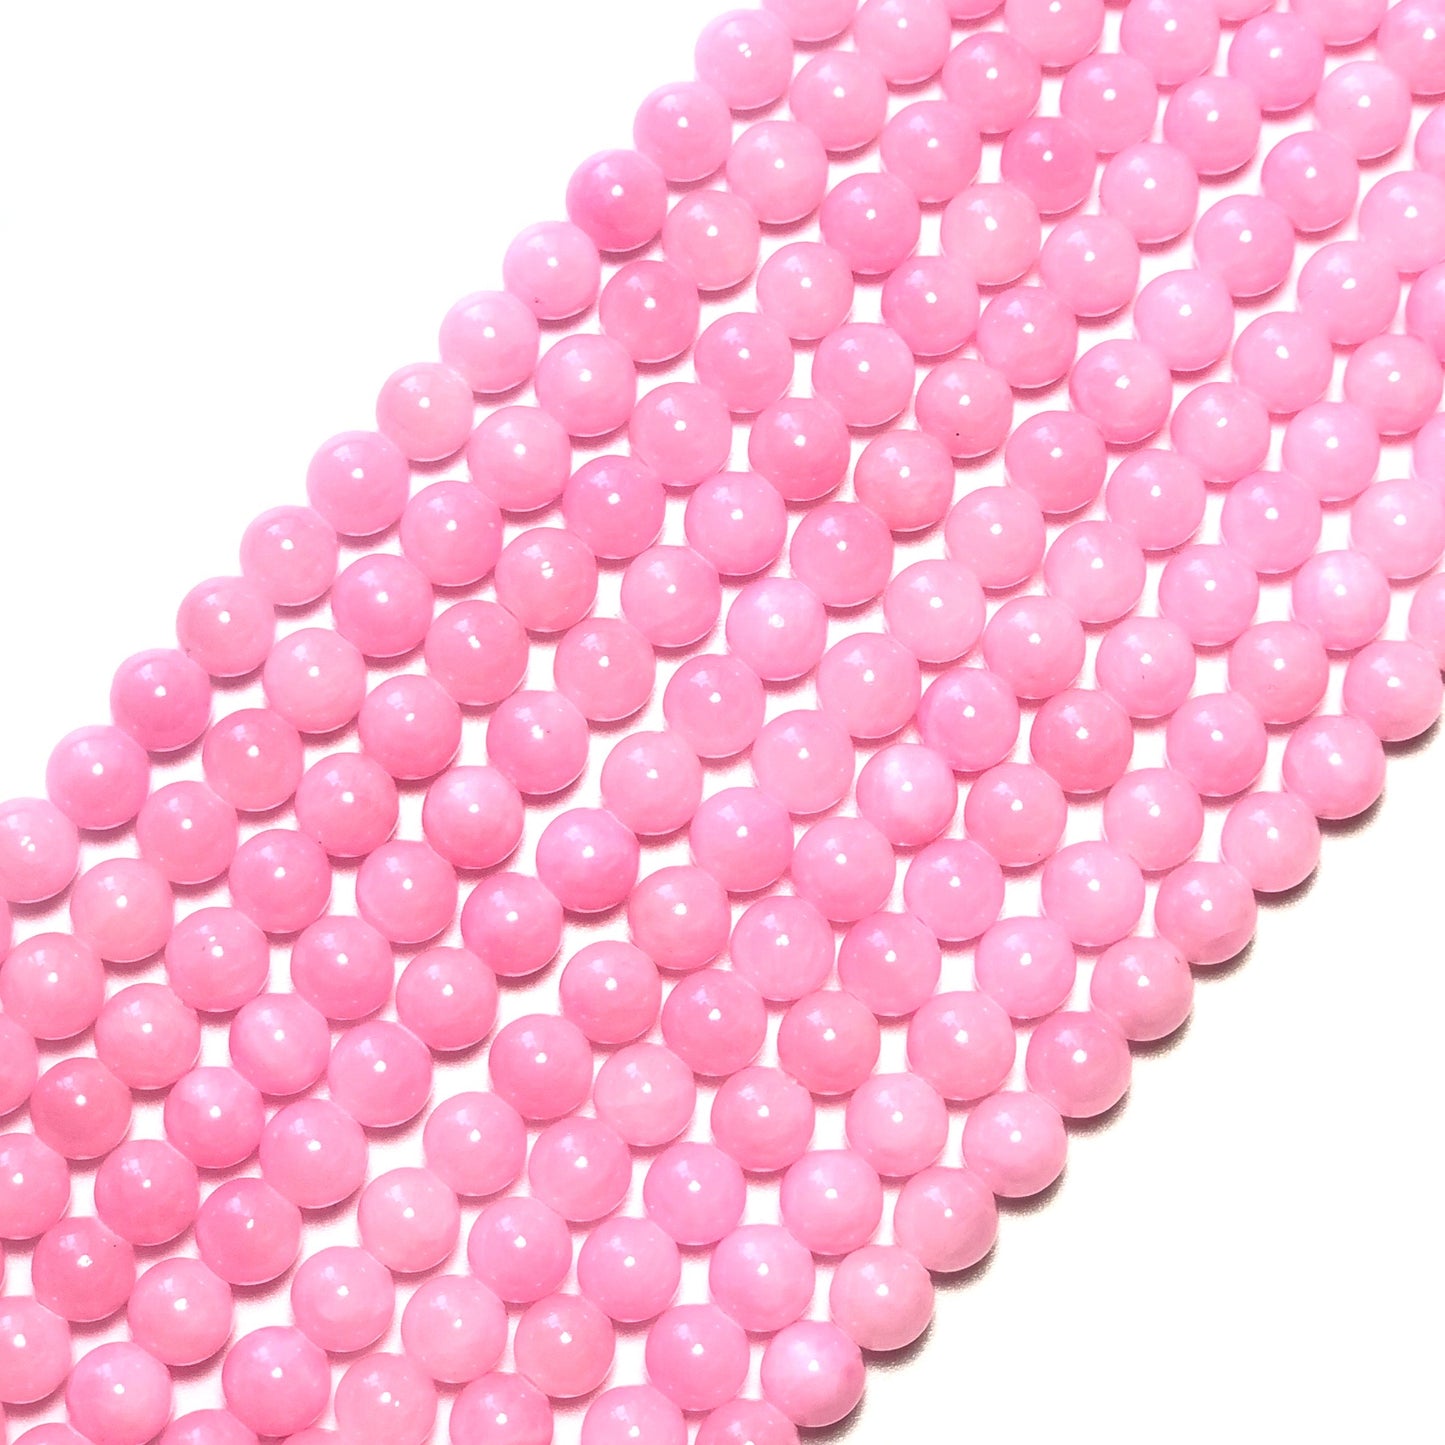 2 Strands/lot 8mm, 10mm Natural Pink Jade Round Stone Beads Stone Beads 8mm Stone Beads Breast Cancer Awareness Round Jade Beads Charms Beads Beyond